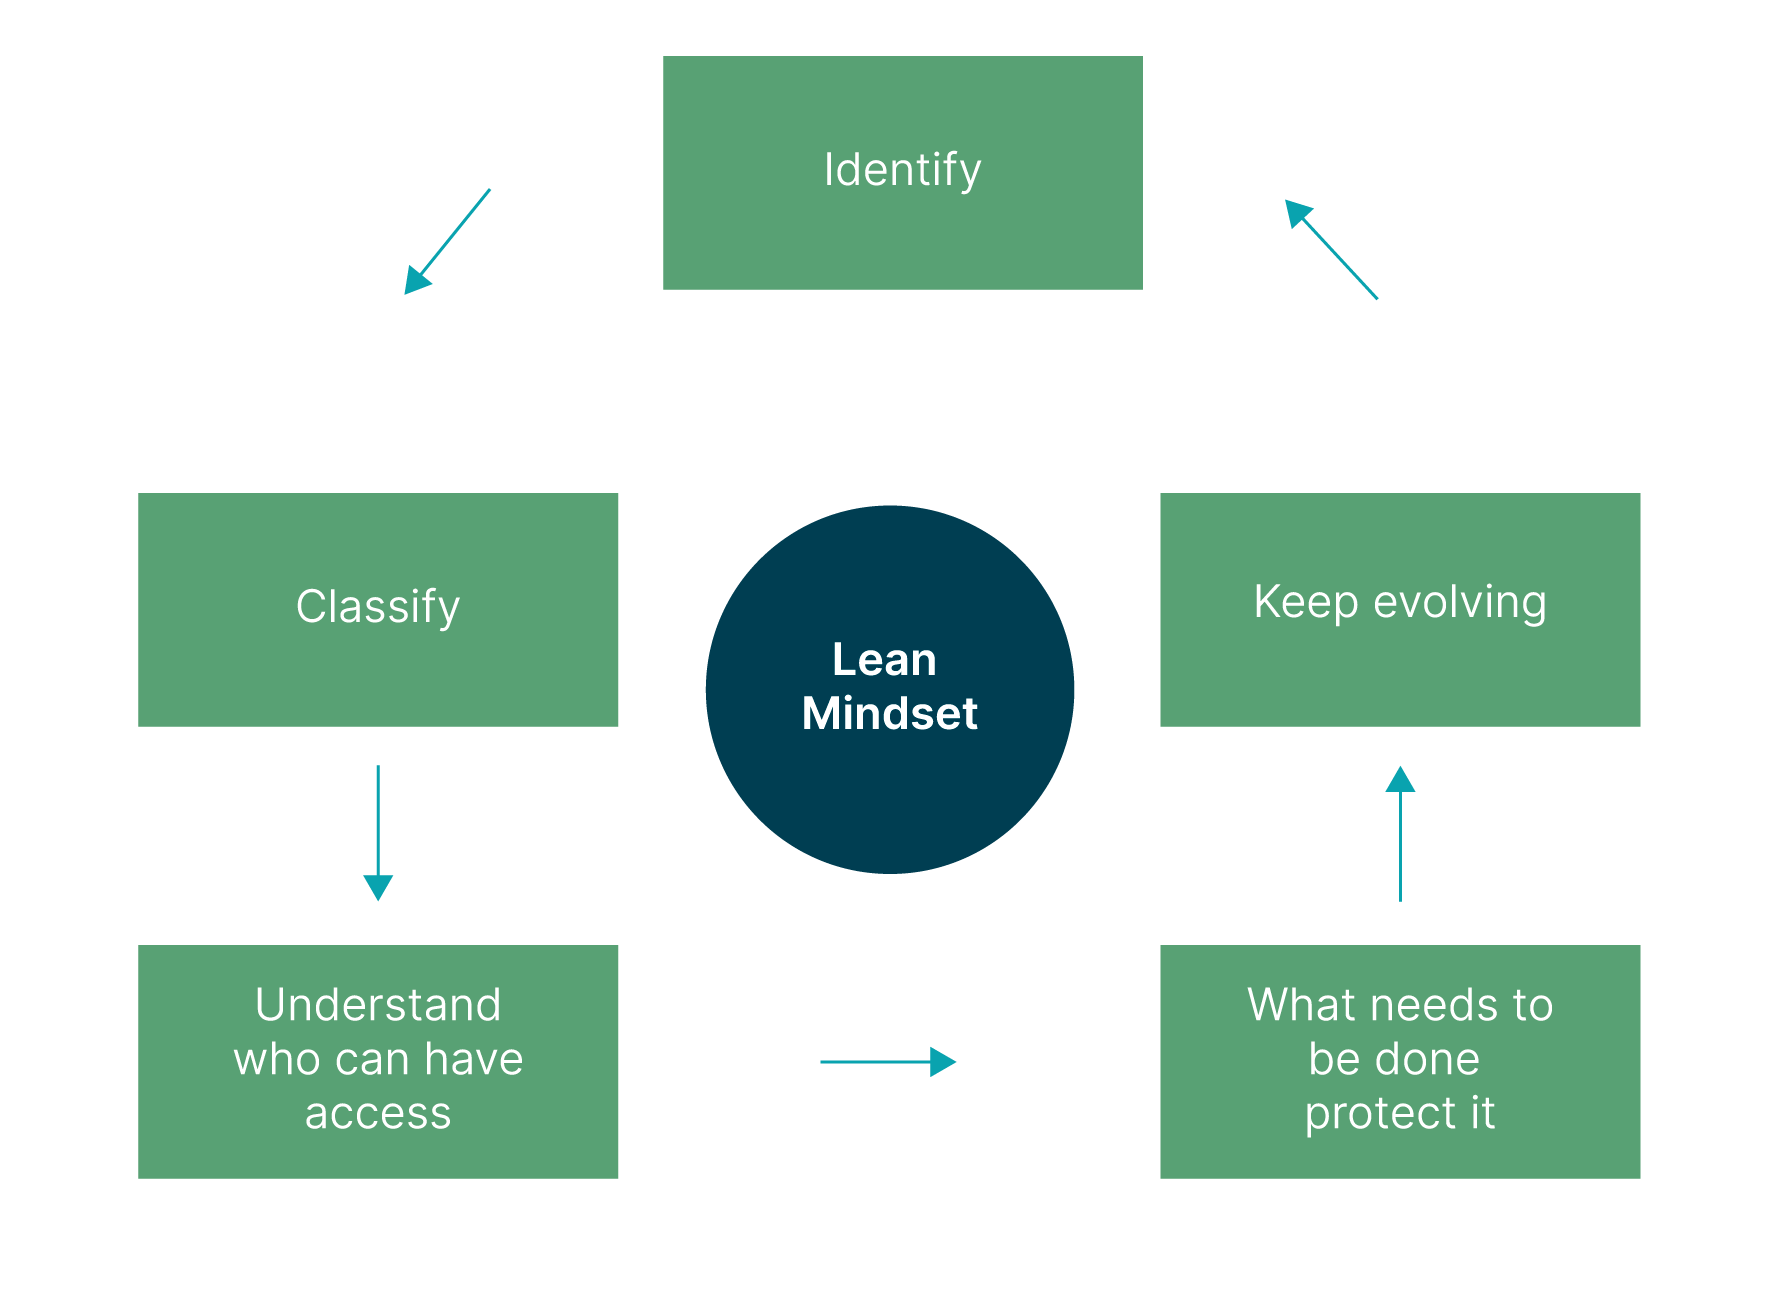 A mental model of your data as it enters your systems using the lean mindset 1) identify 2) classify 3) understand who can have access 4) what needs to be done to protect it 5) keep evolving and repeat the cycle